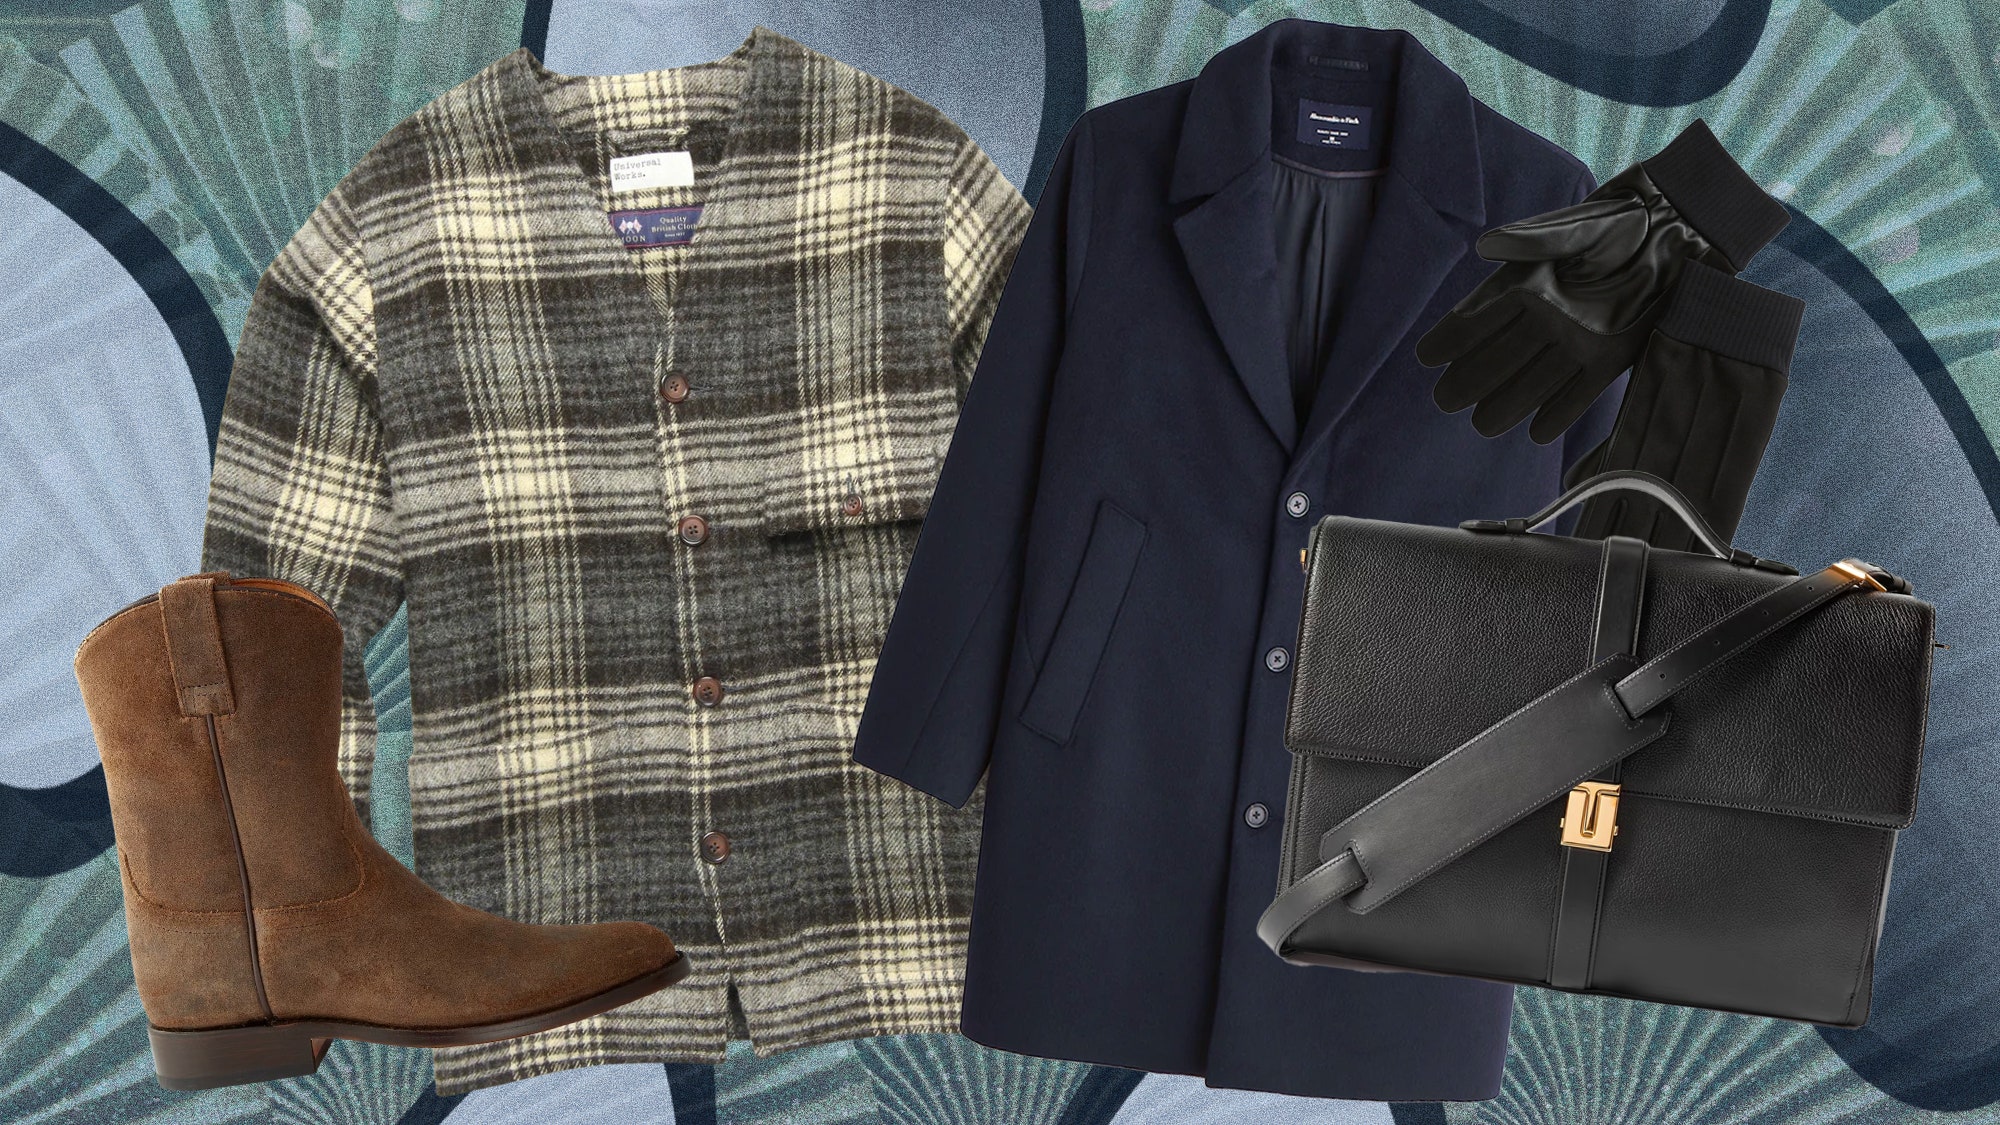 resolved-to-look-way-more-stylish-this-year?-boy,-have-we-got-the-menswear-deals-for-you